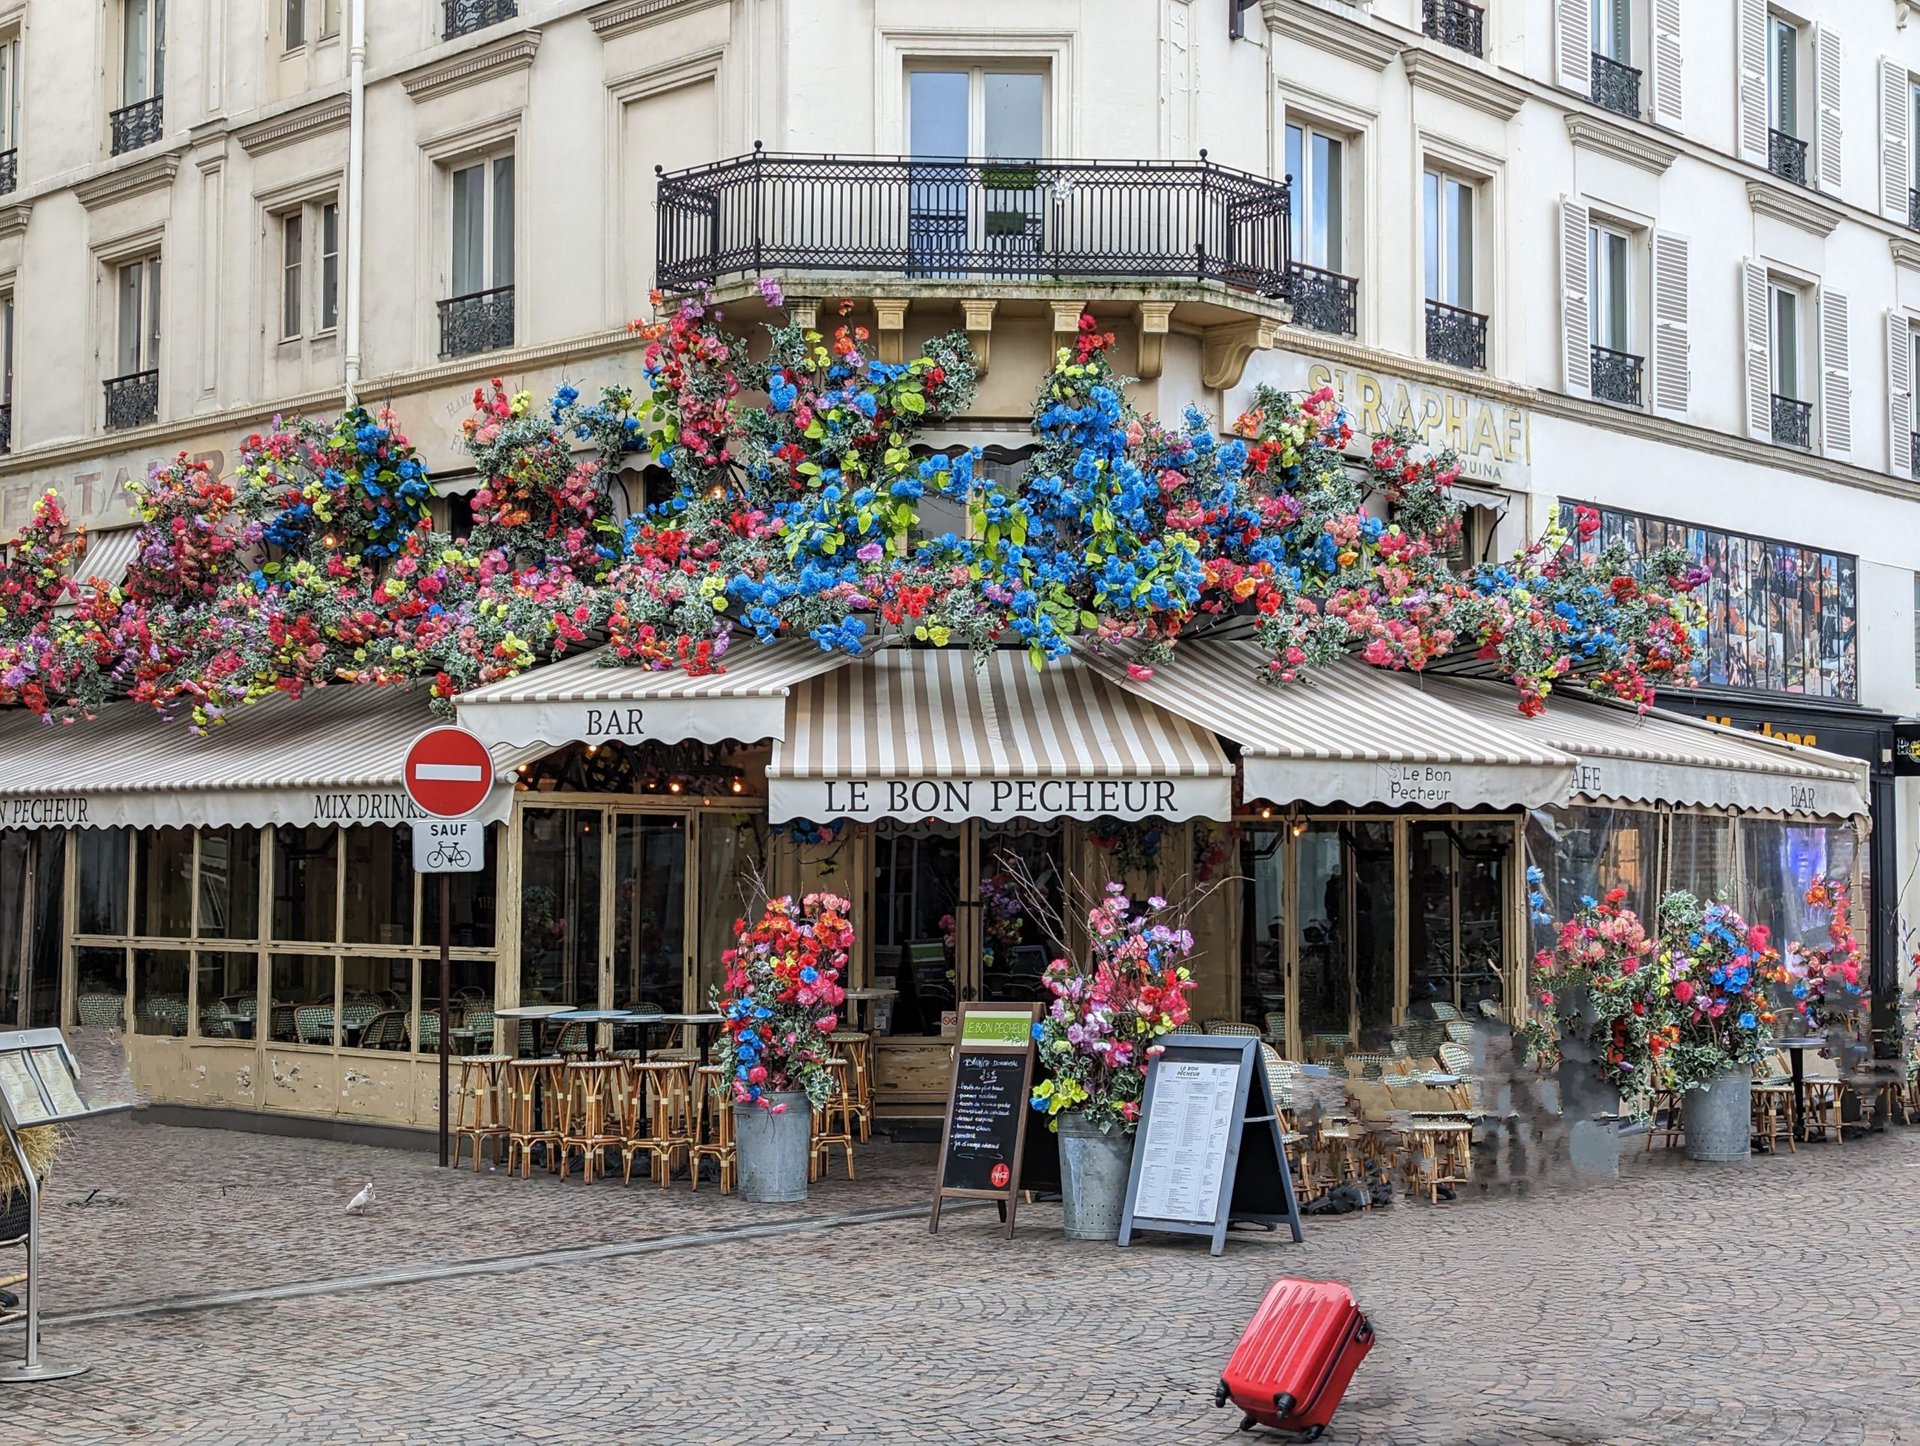 Cafe with flowers Google Magic Eraser